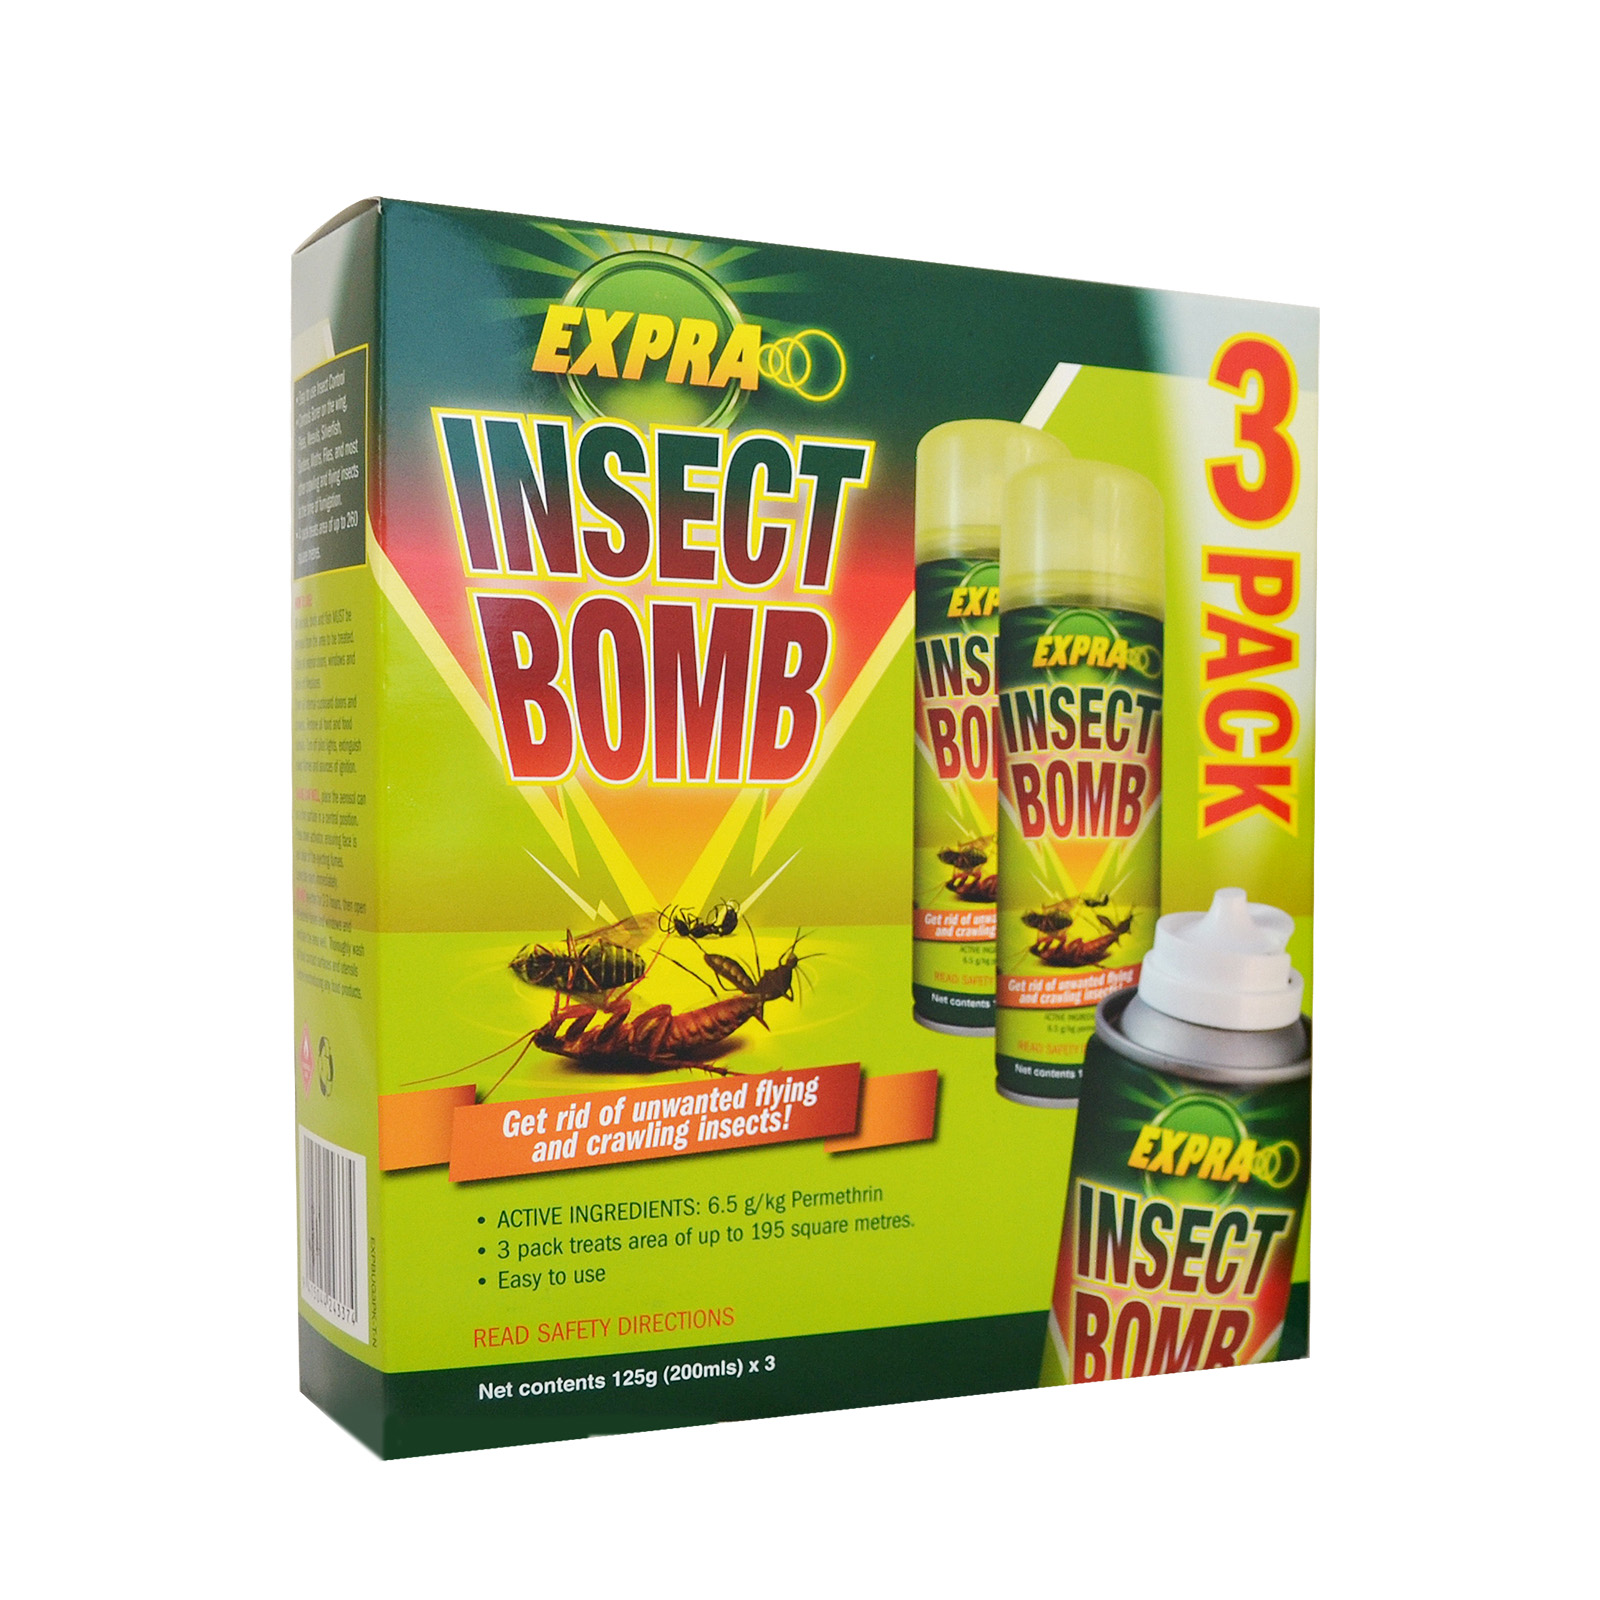 EXPRA INSECT BOMB 3 PACK Expra